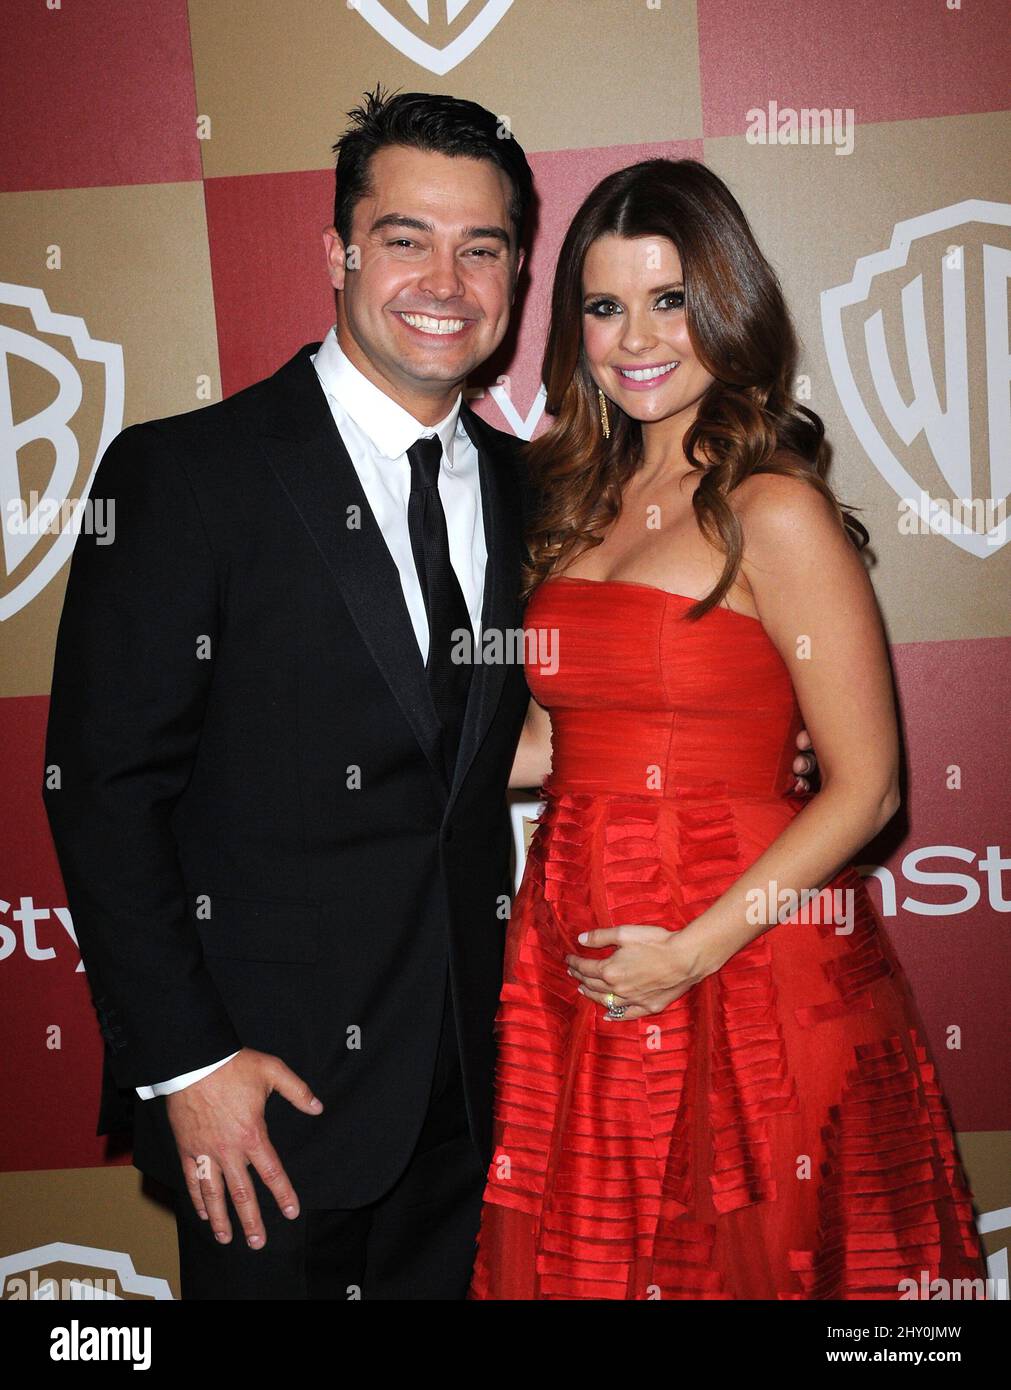 Joanna garcia and nick swisher hi-res stock photography and images - Alamy